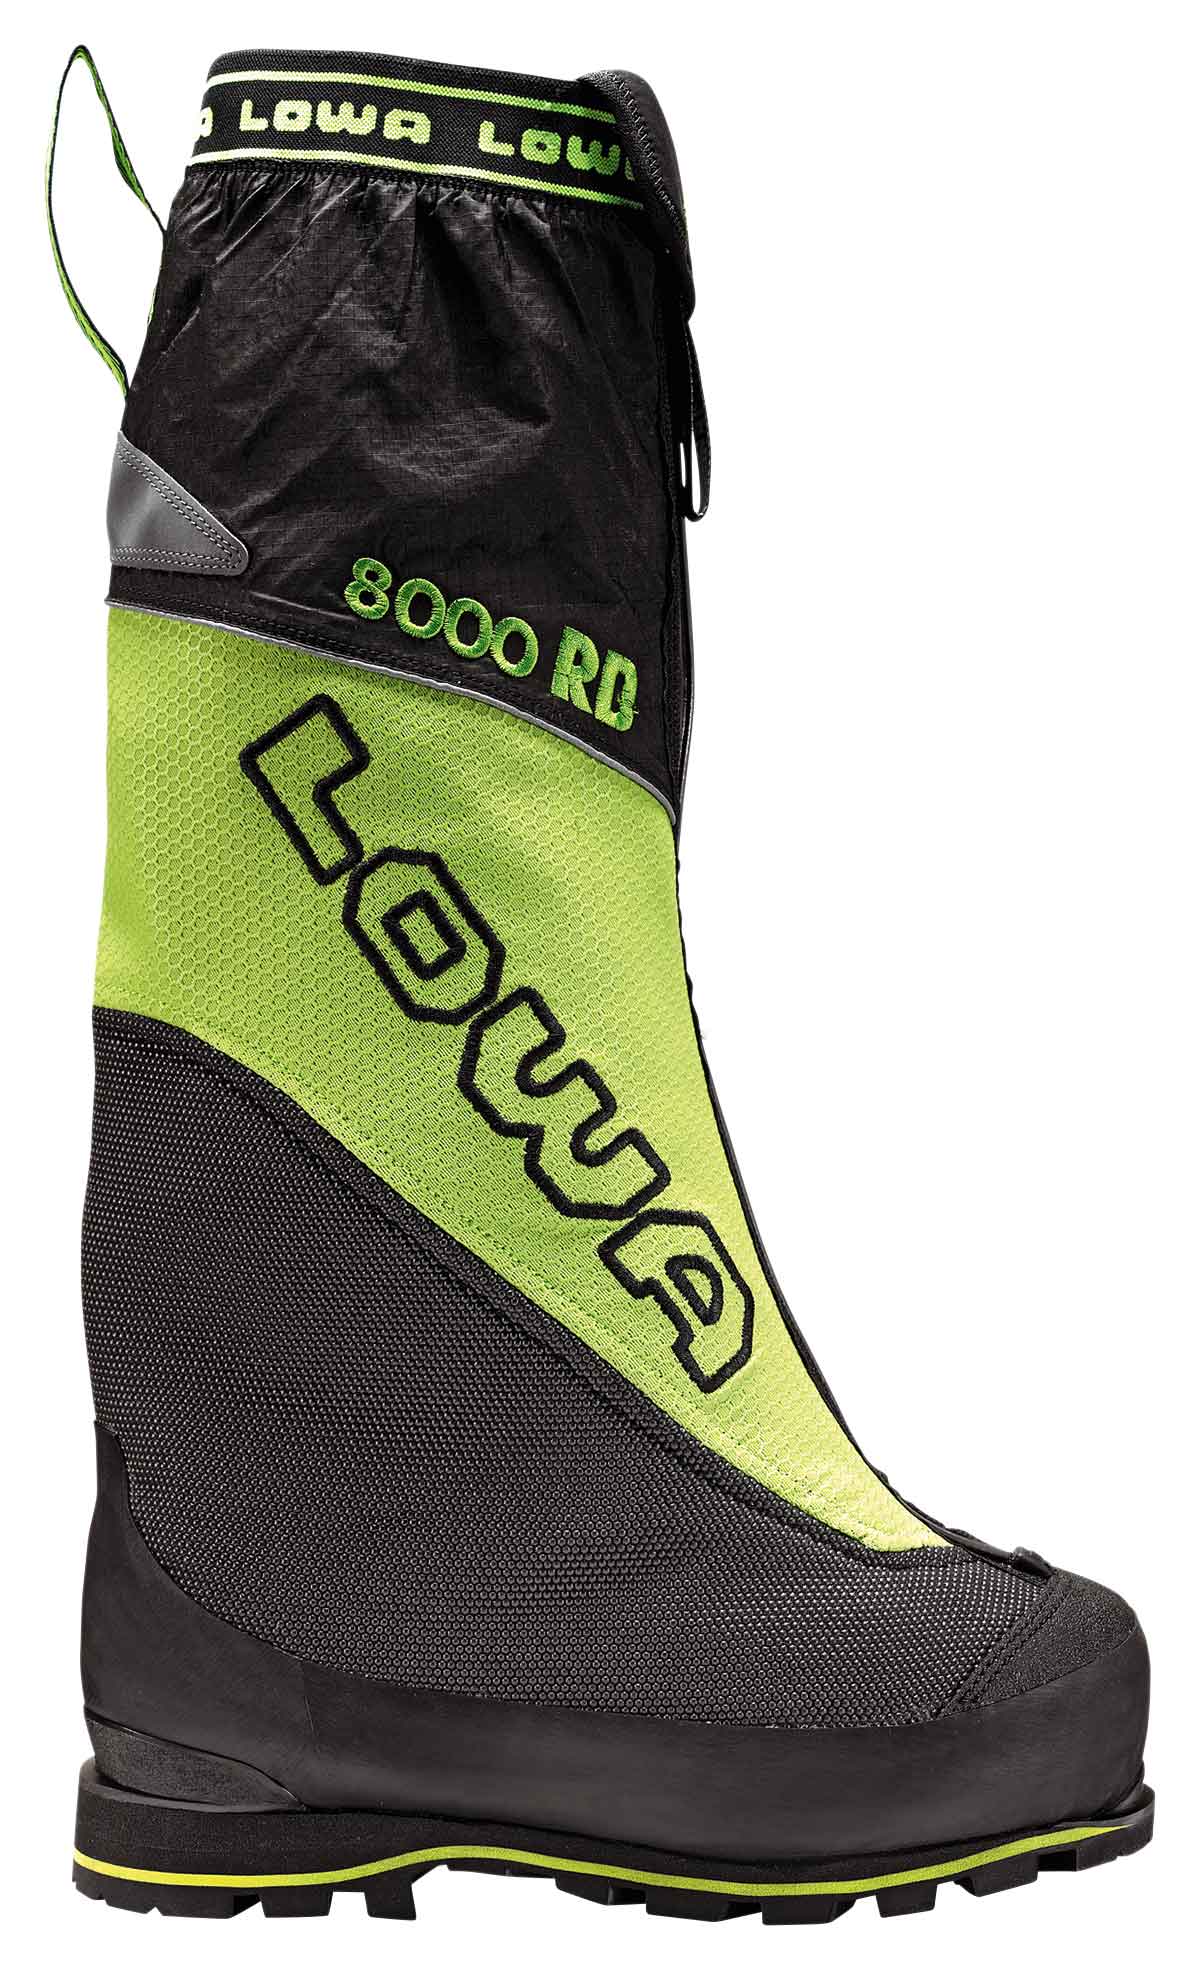 Lowa Expedition 8000 Evo RD - Horolezecké boty | Hardloop